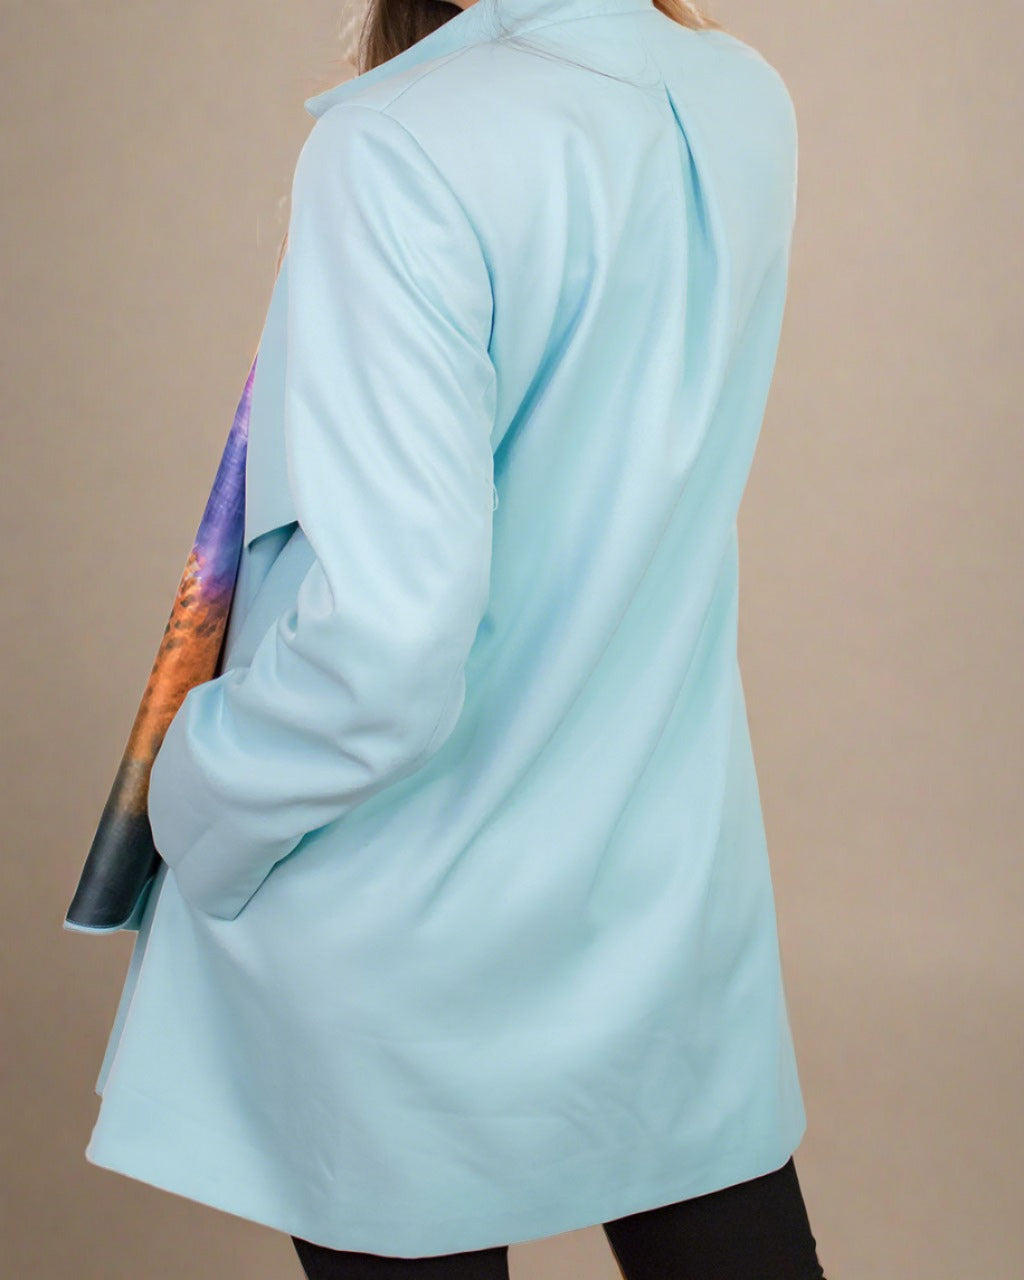 Back view of oversized blue coat ADKN